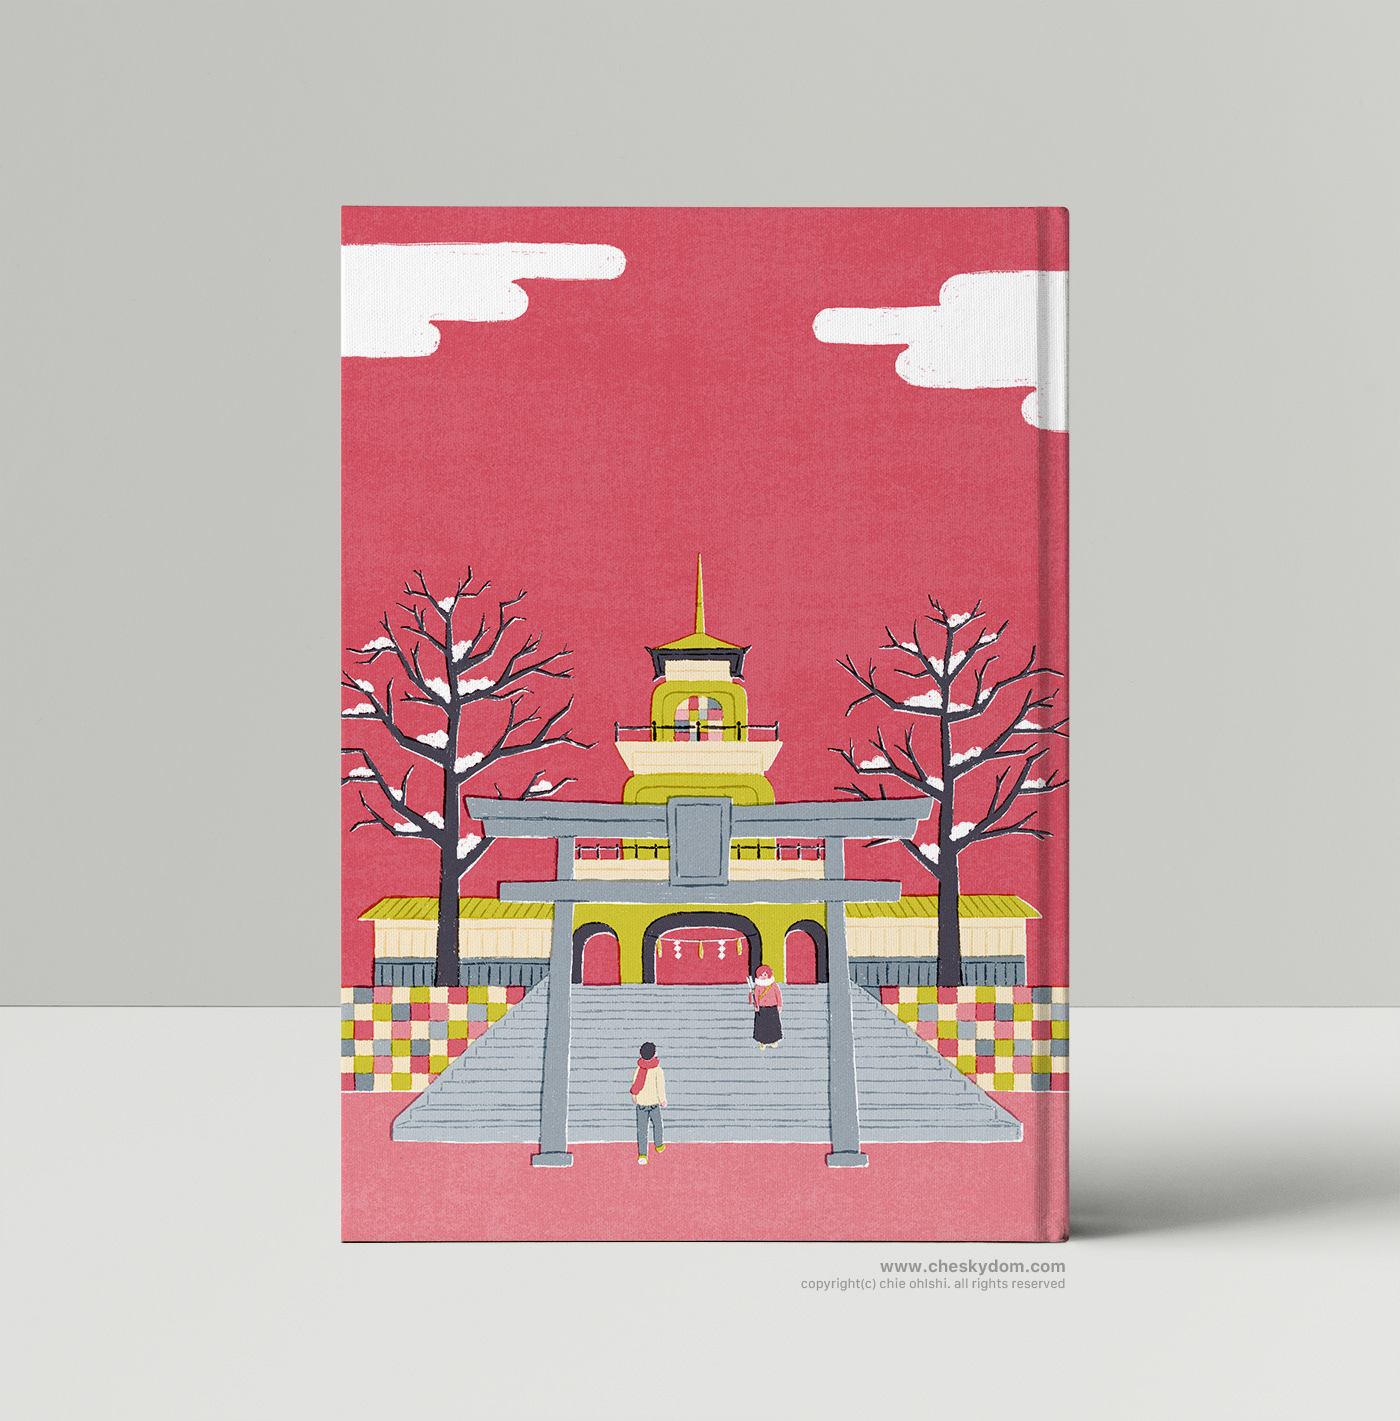 The mockup of a book cover with the illustration of the traditional shrine in Knazawa, Japan.